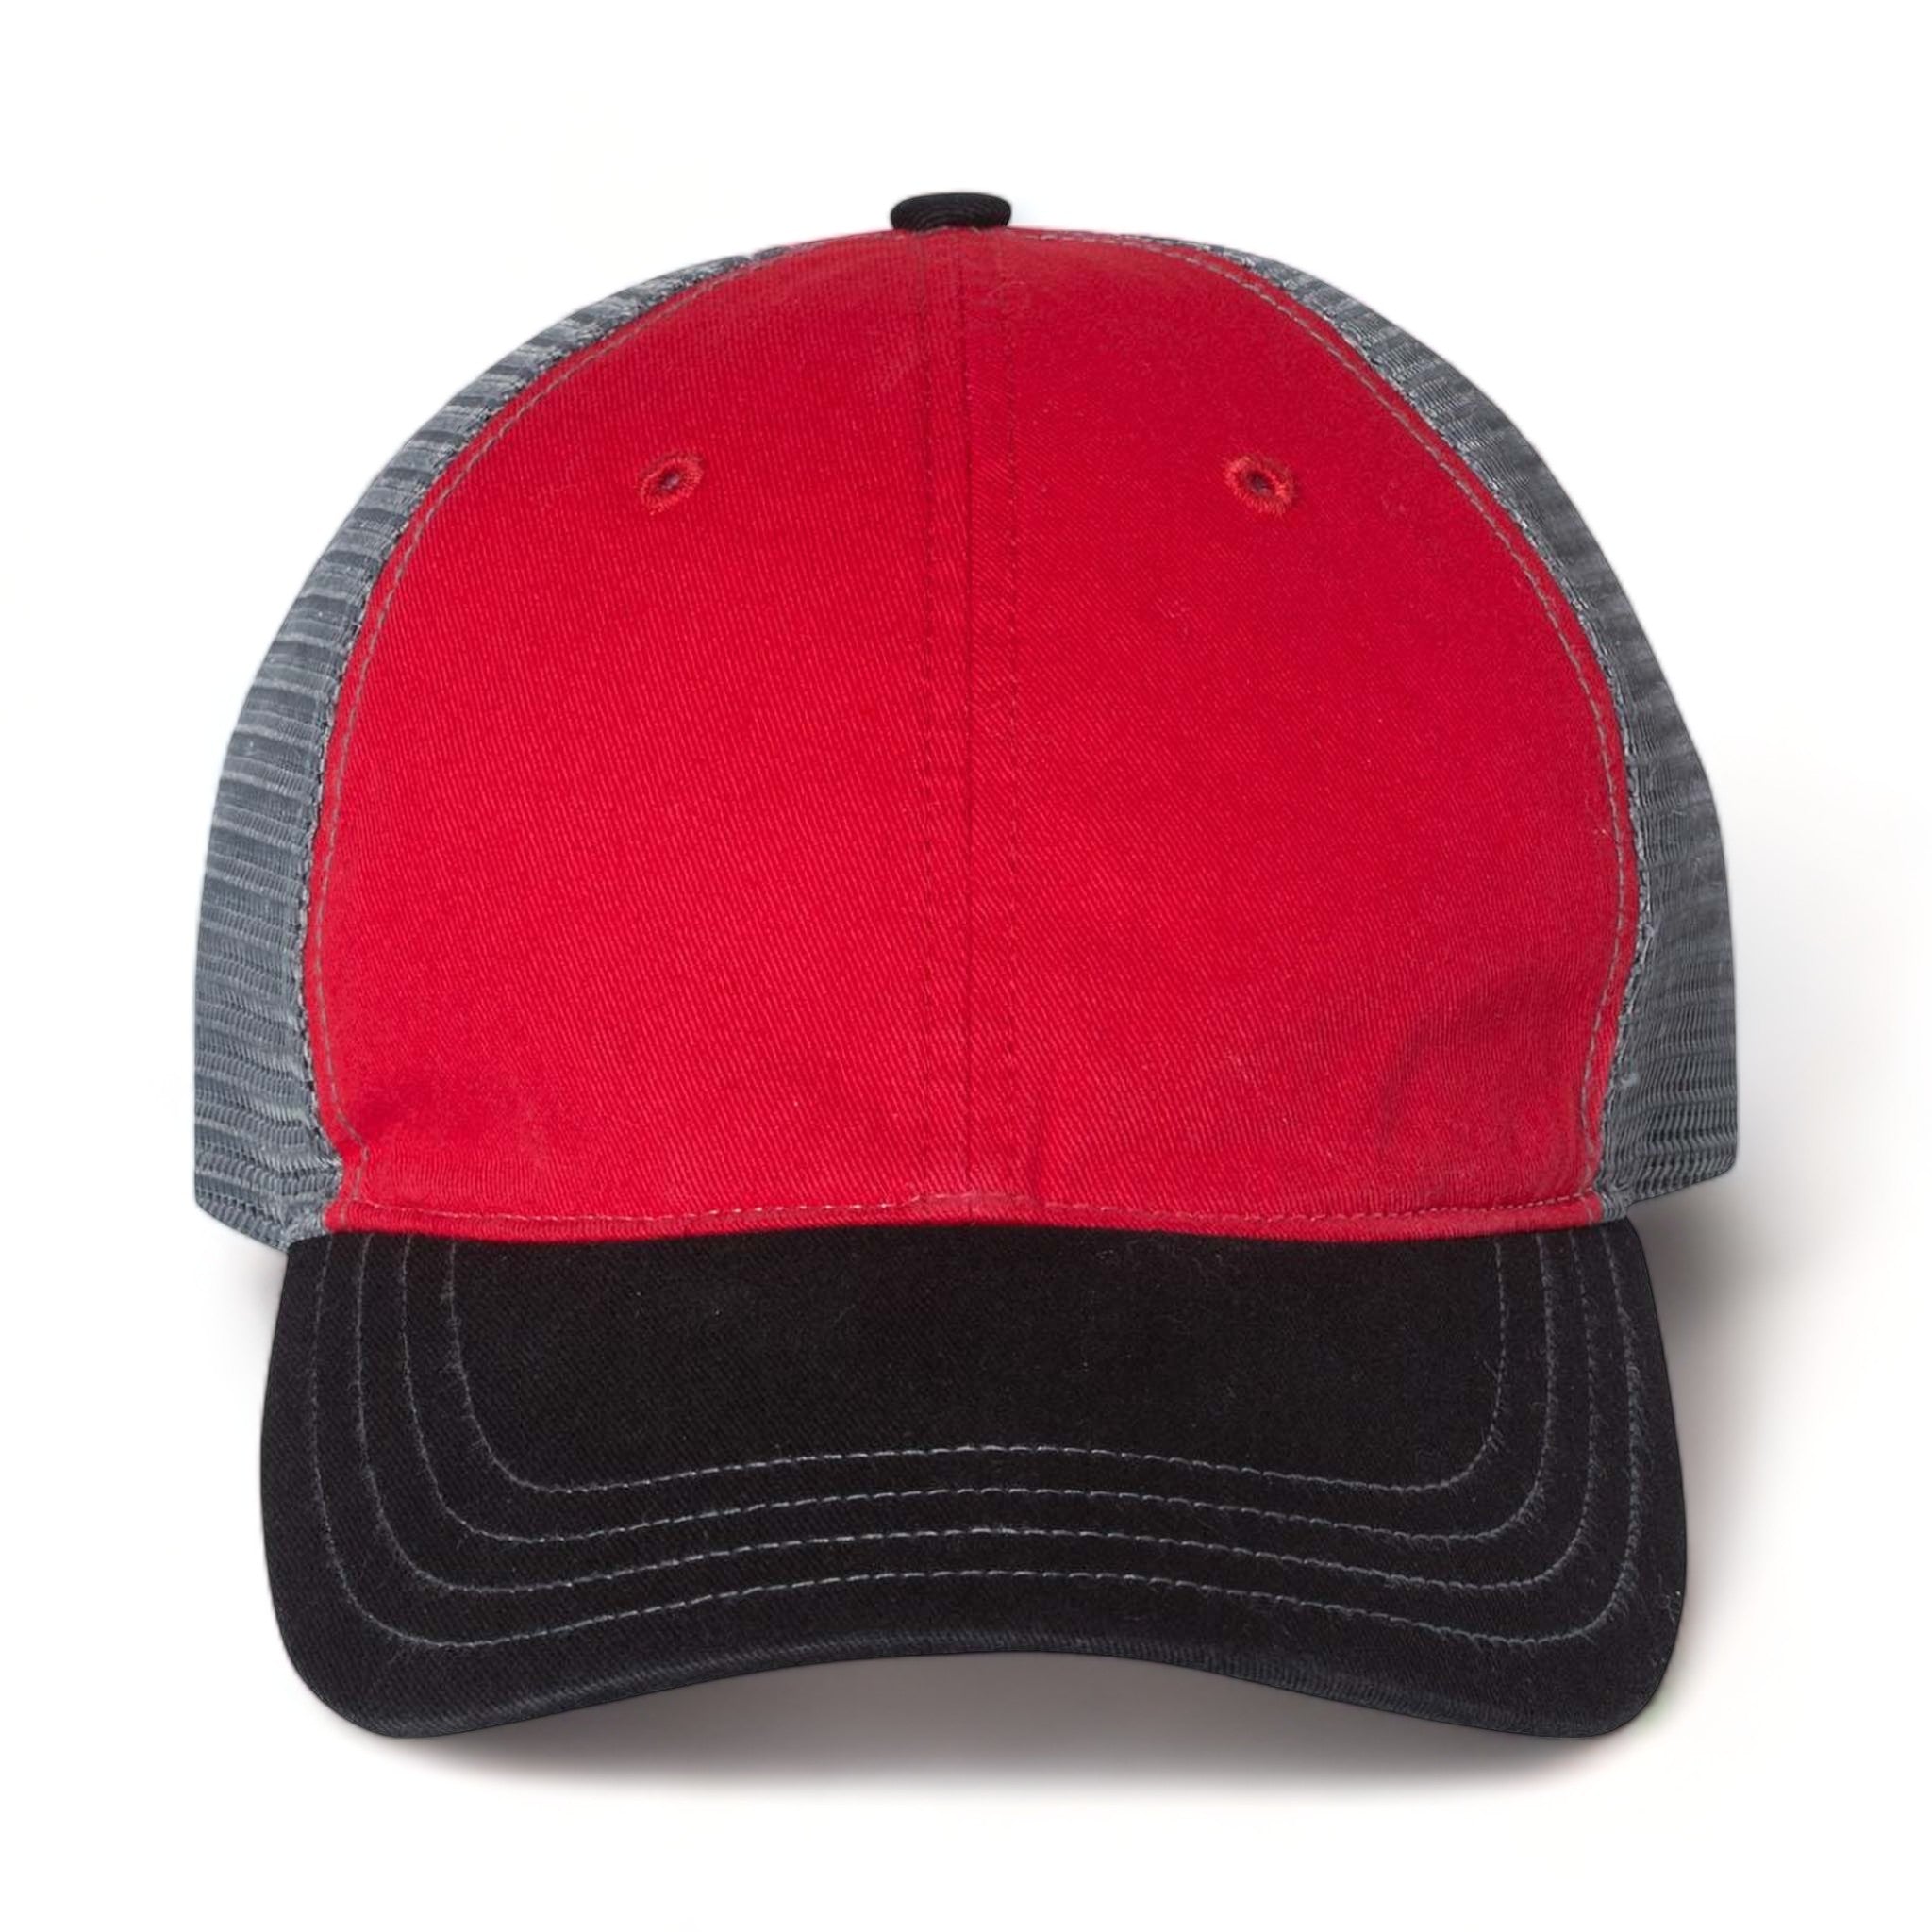 Front view of Richardson 111 custom hat in red, charcoal and black